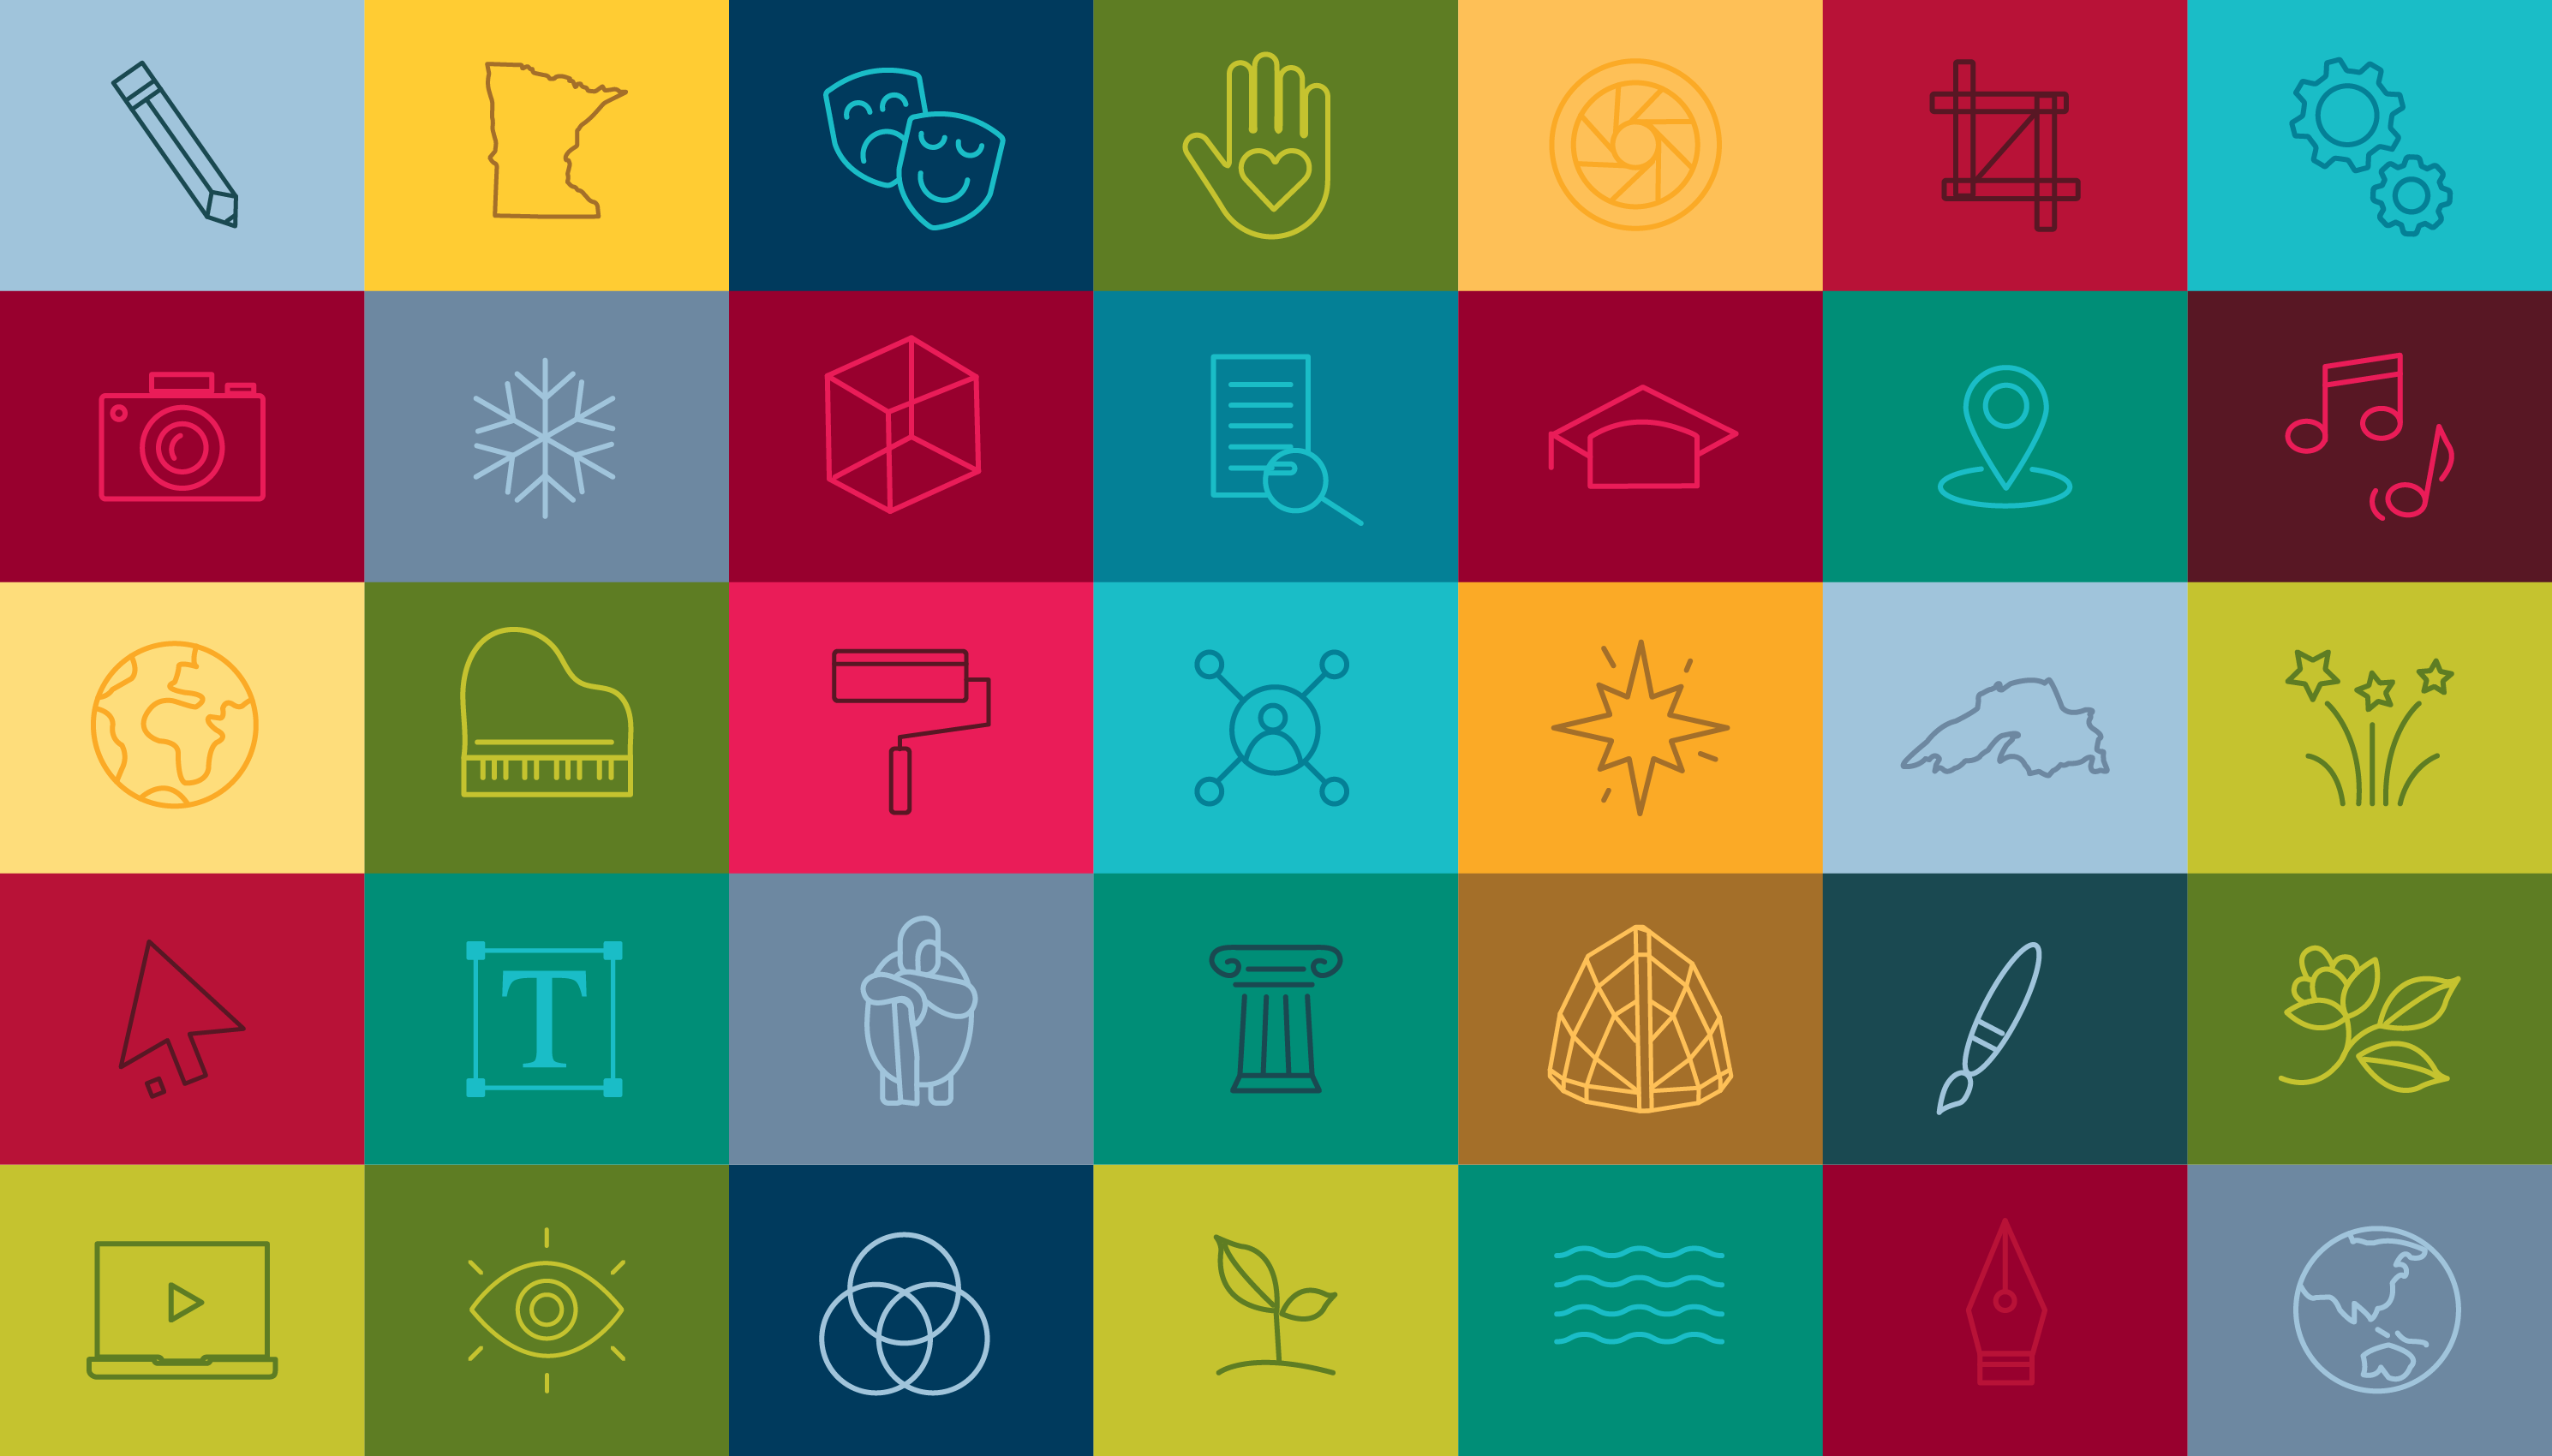 colorful grid graphic with iconography that depicts the various areas of study within the College of Arts, Humanities, and Social Sciences